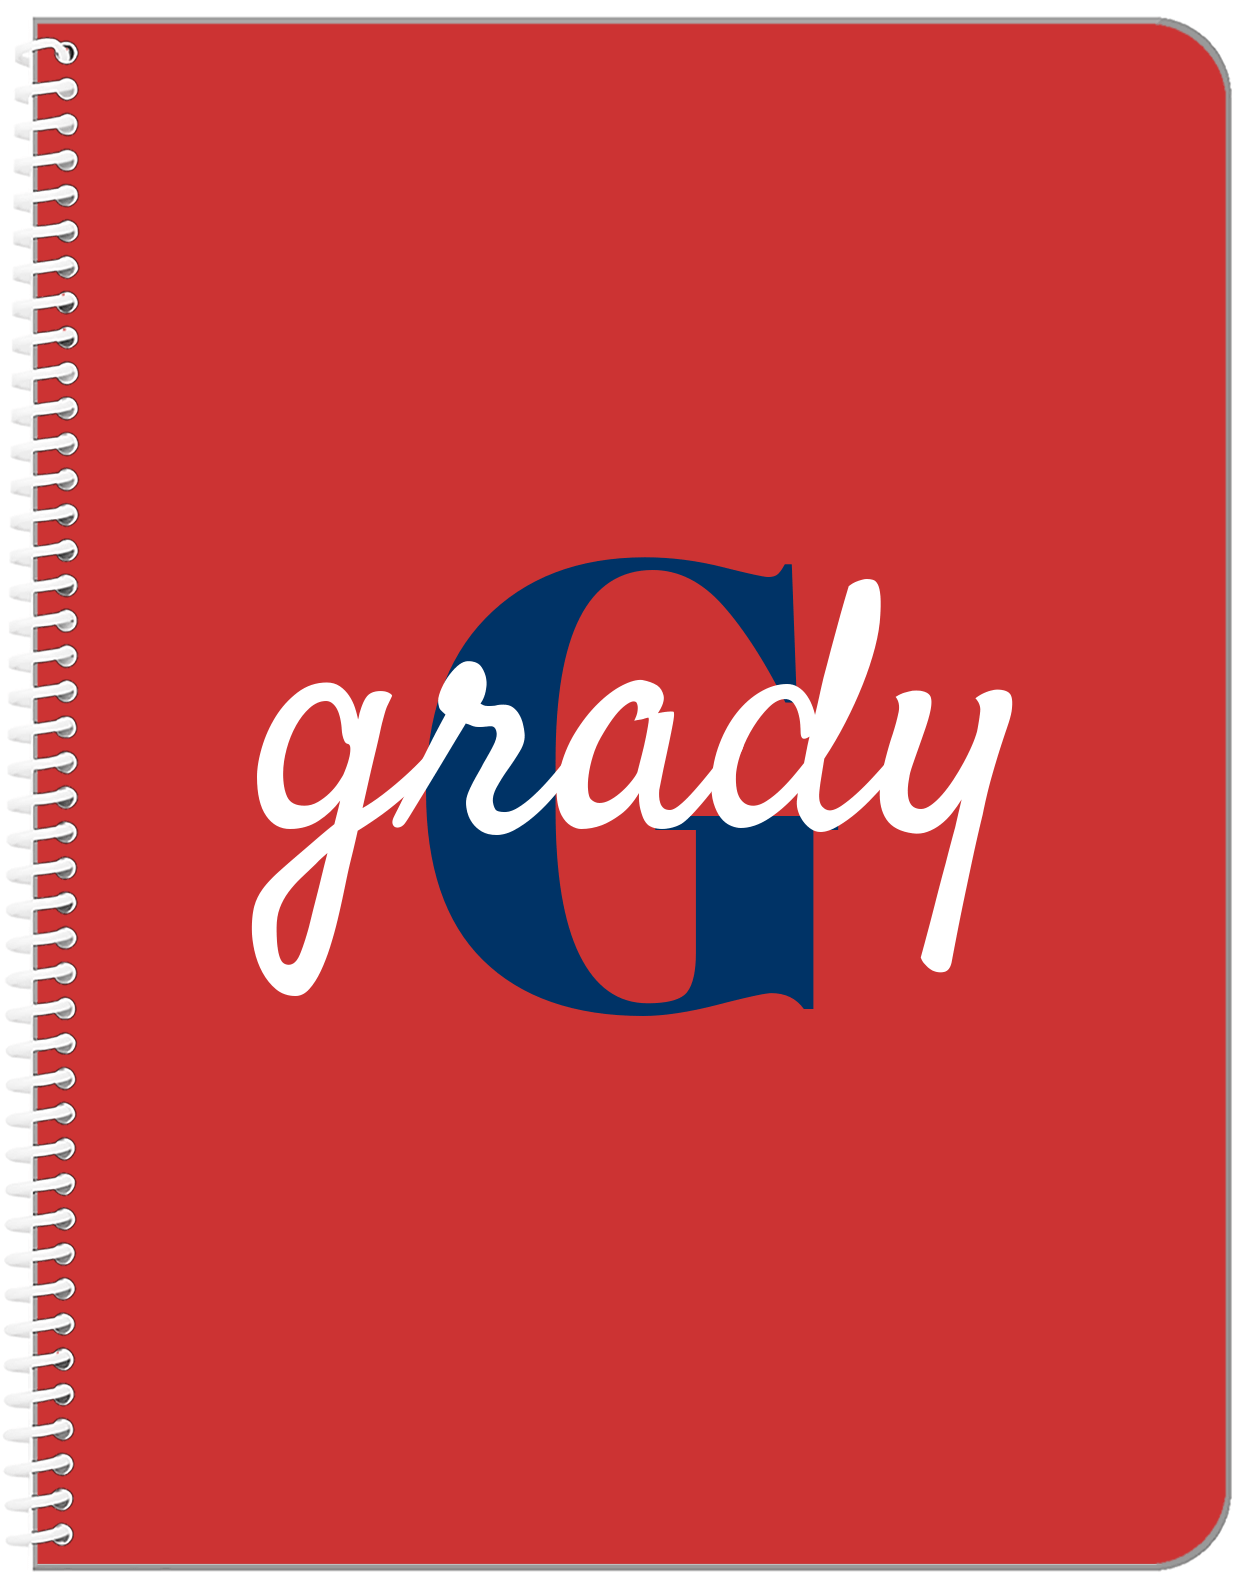 Personalized Solid Color Notebook - Red Background - Name Over Initial - Front View